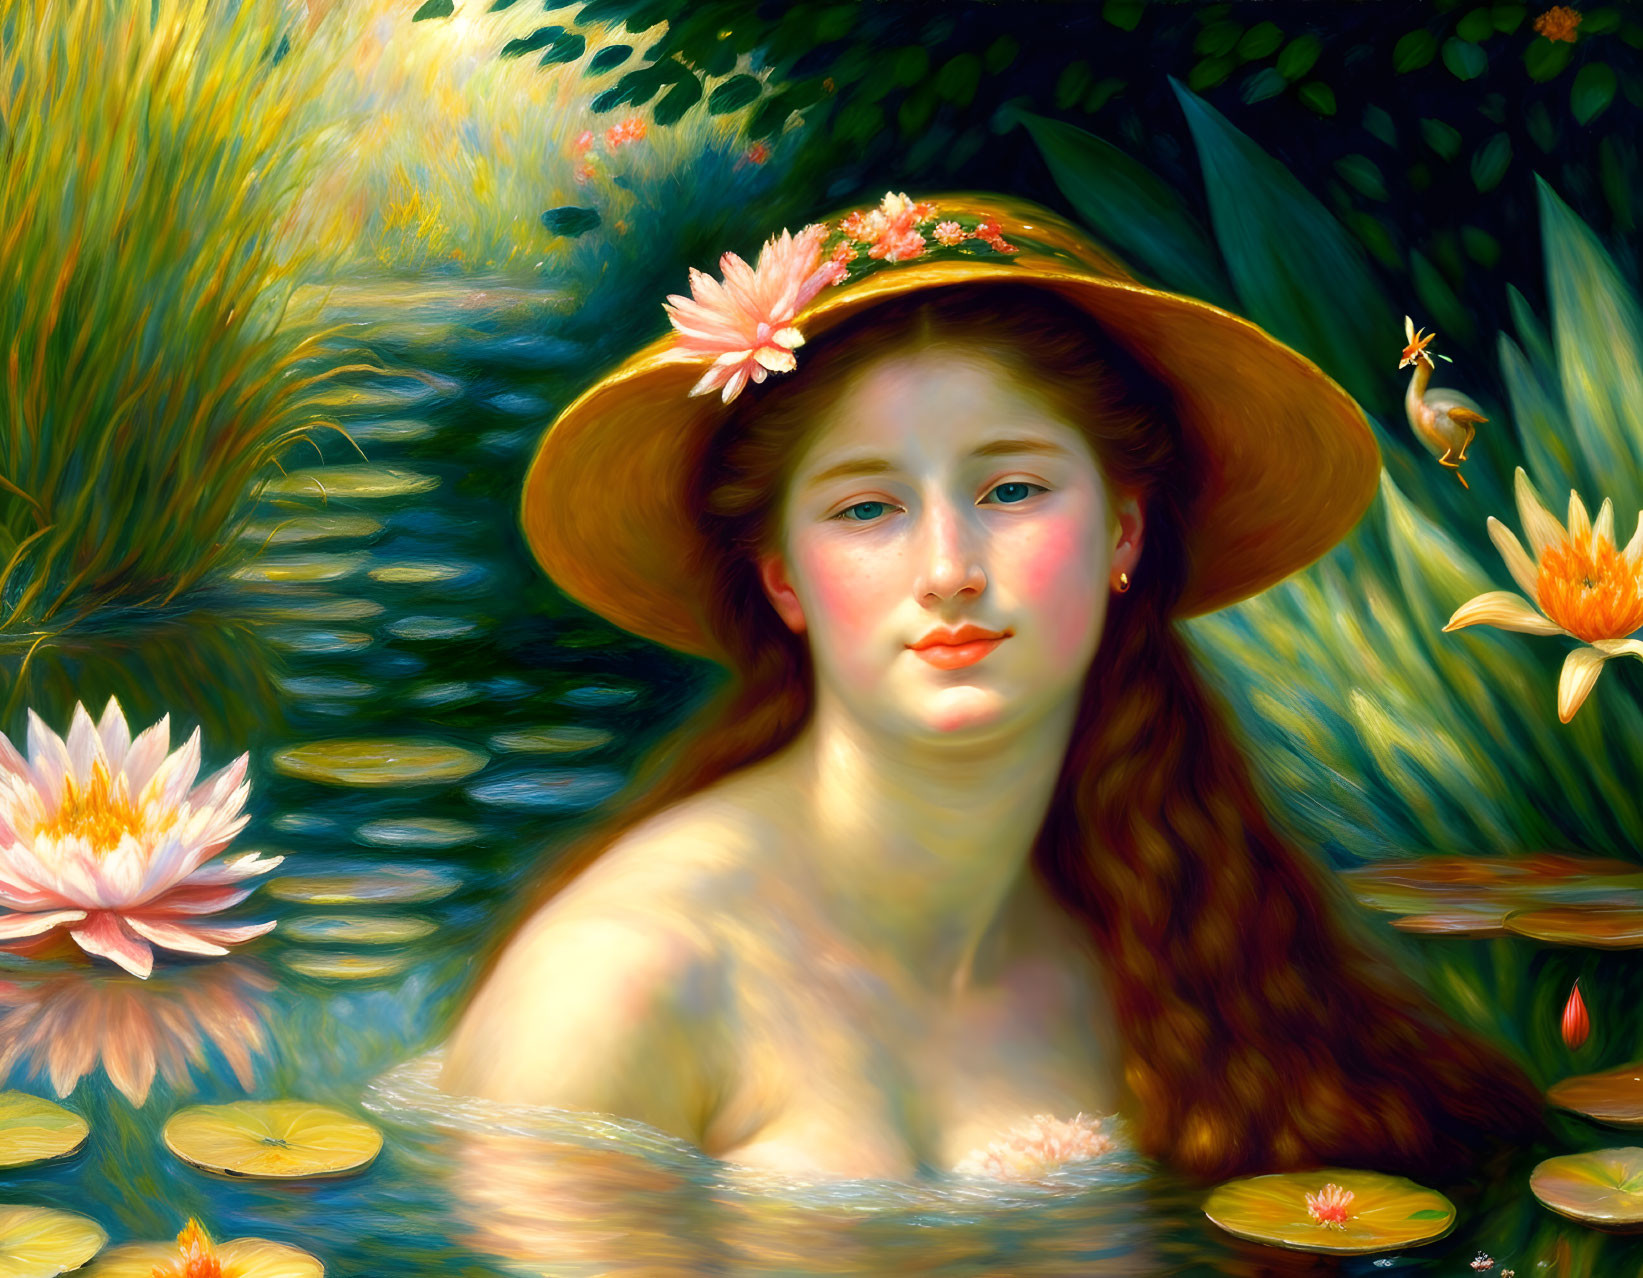 Nymph in Lily Pond, After Renoir